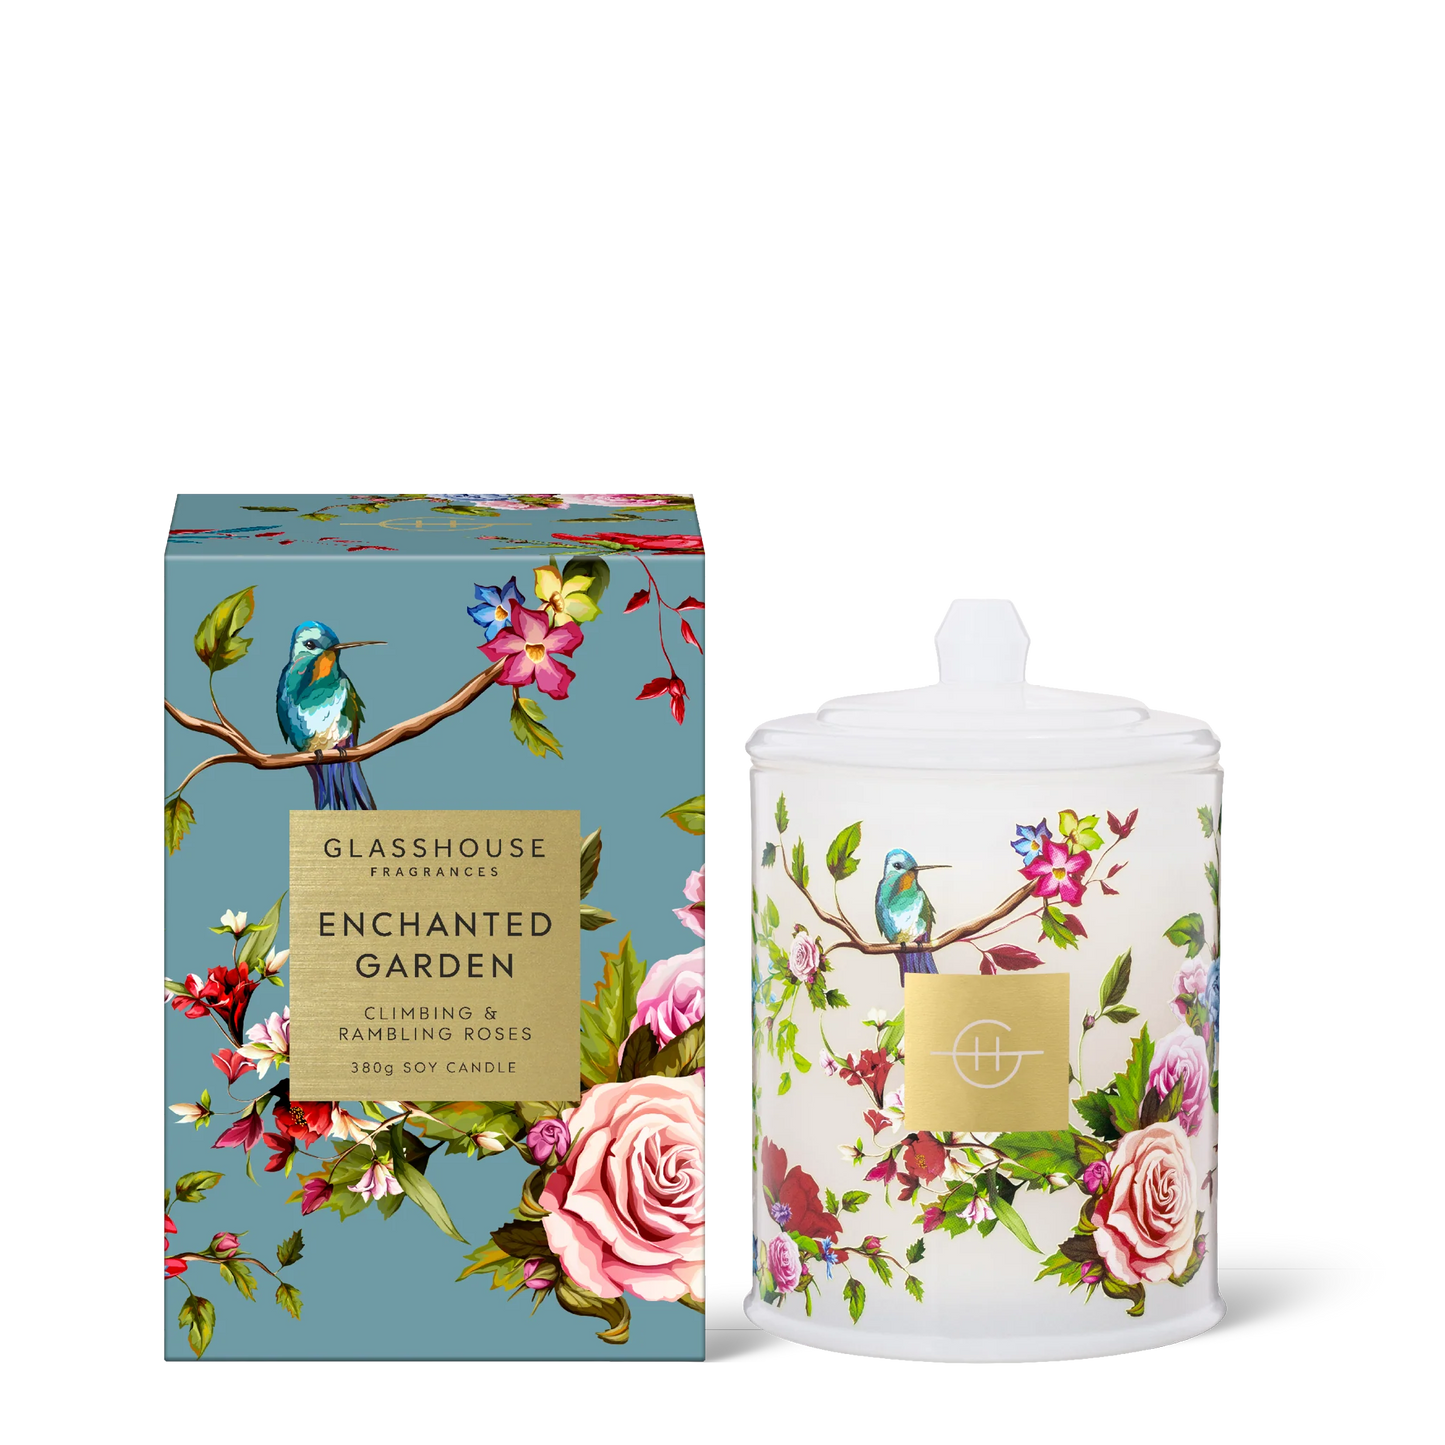 Glasshouse Fragrances Enchanted Garden Triple Scented Candle set next to its box packaging.